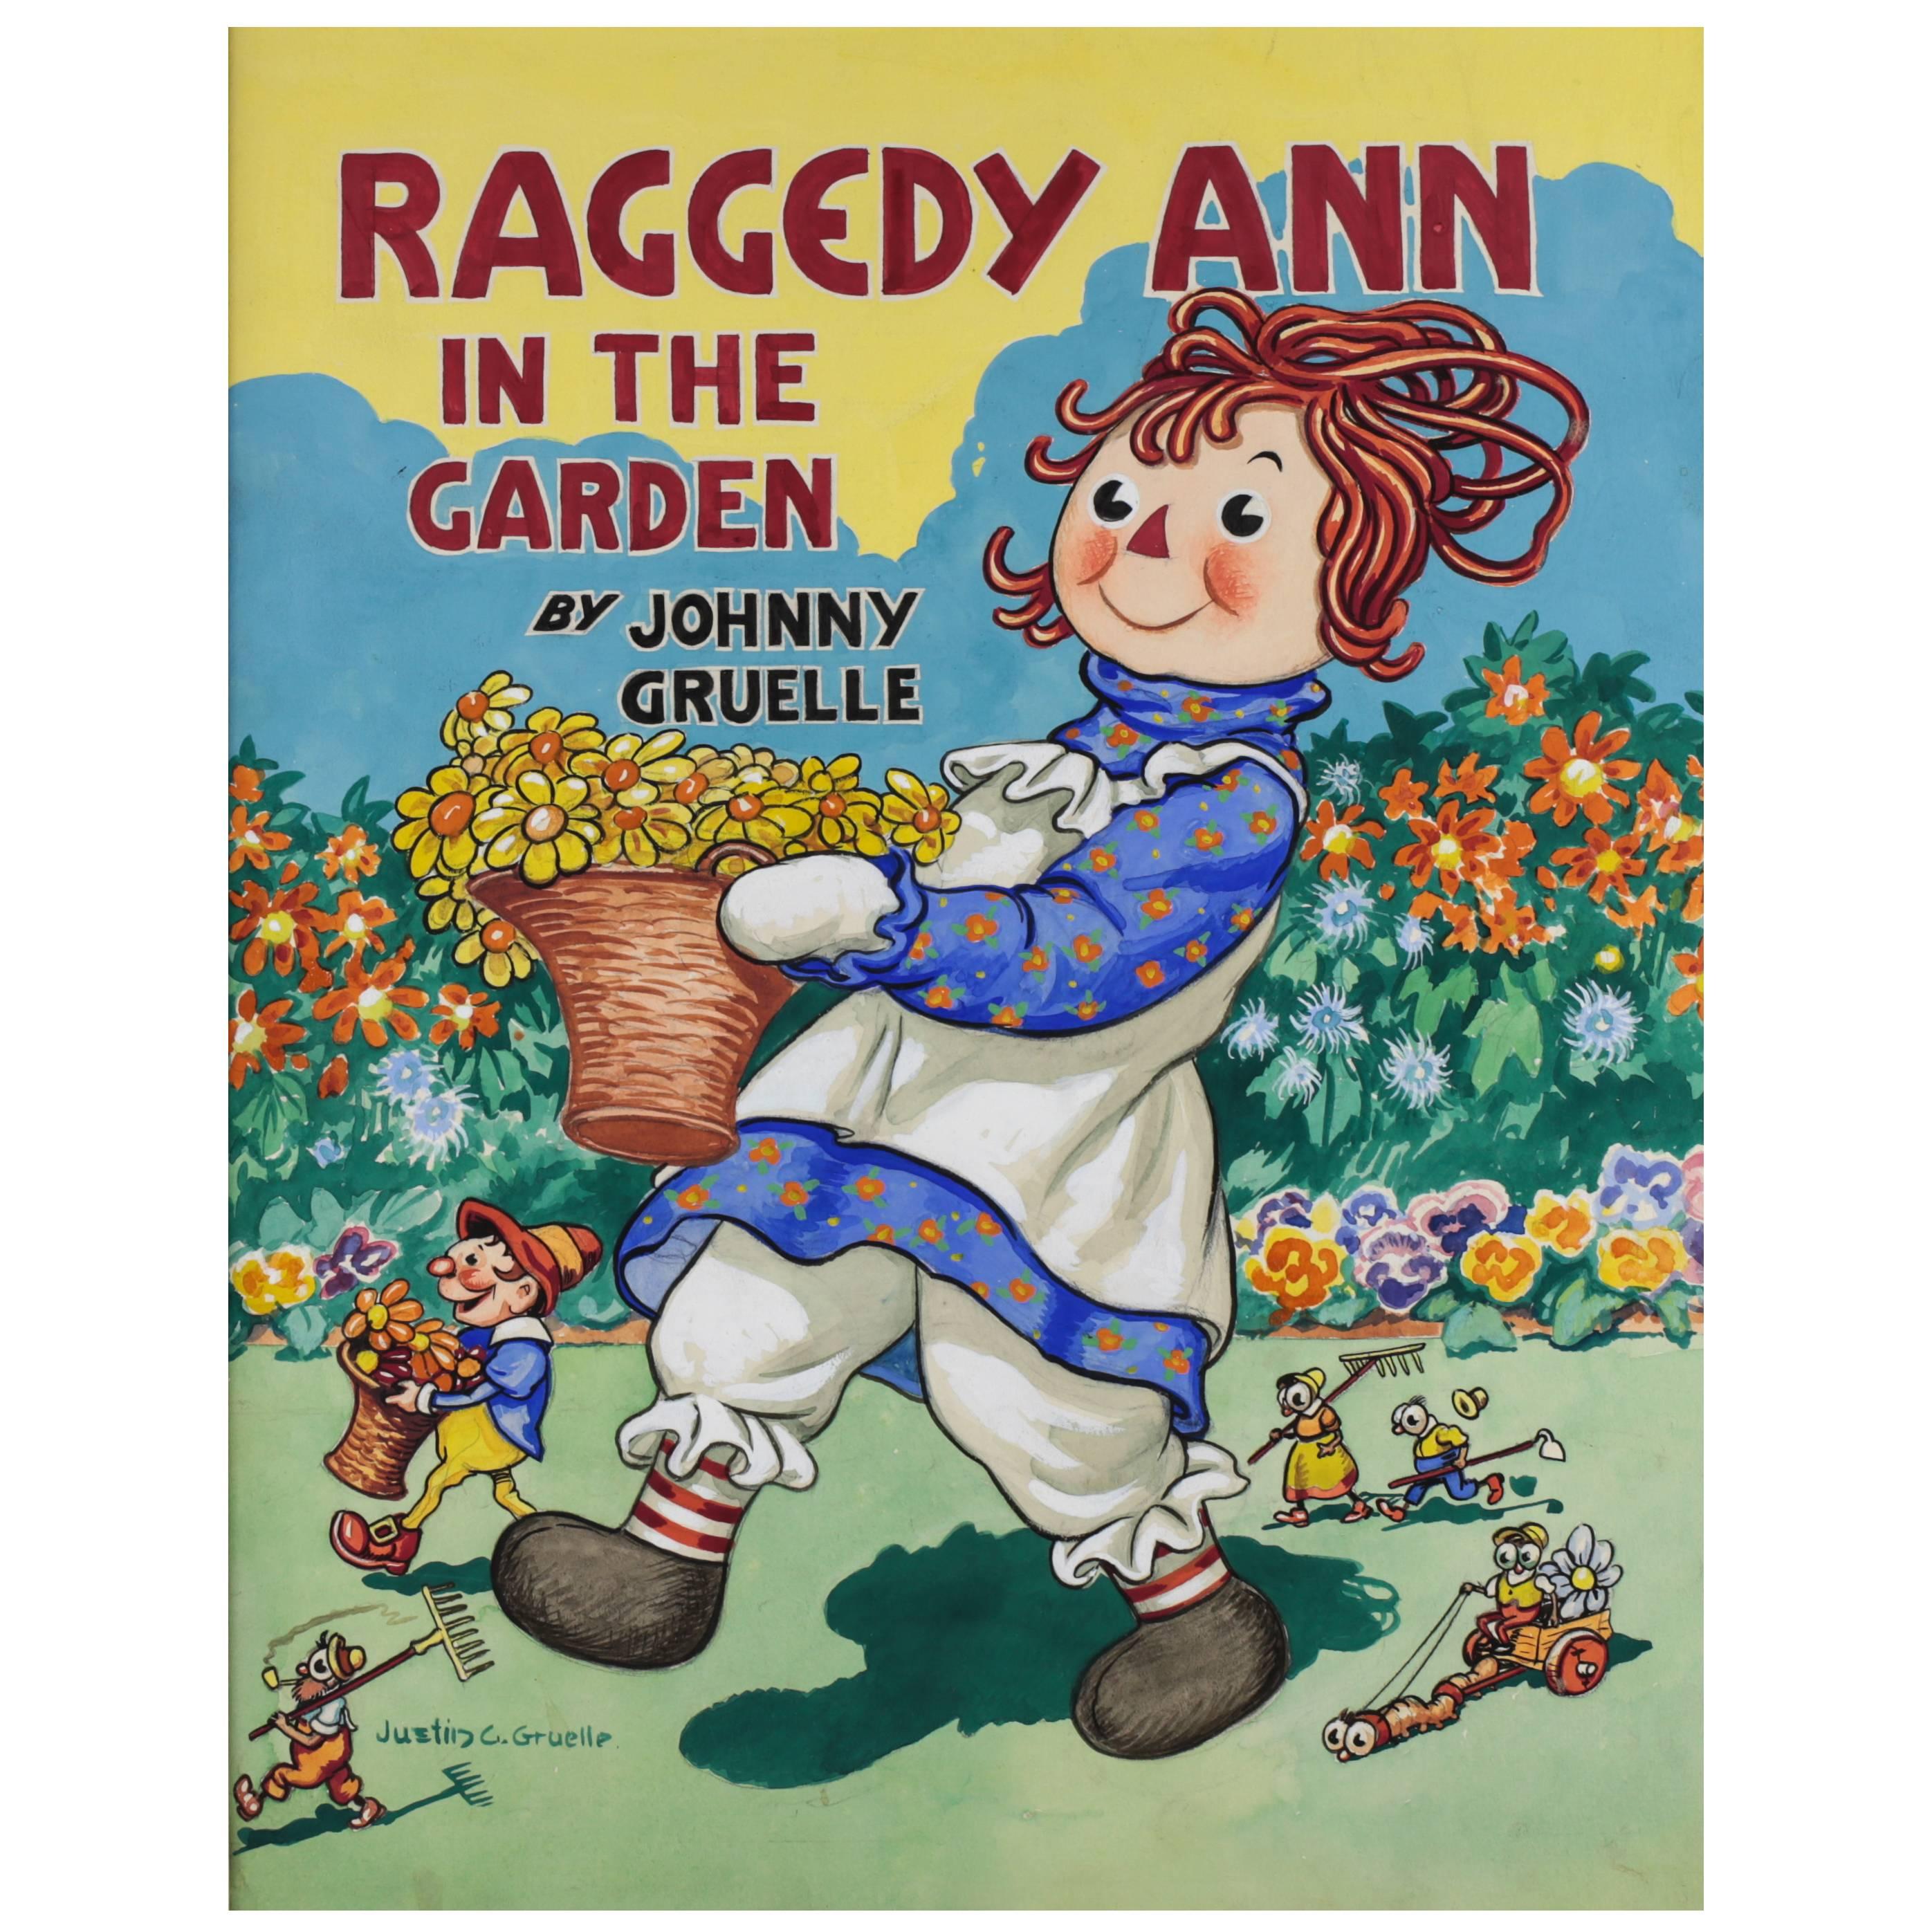 Original Watercolor Cover Art "Raggedy Ann In The Garden" by Justin Gruelle For Sale